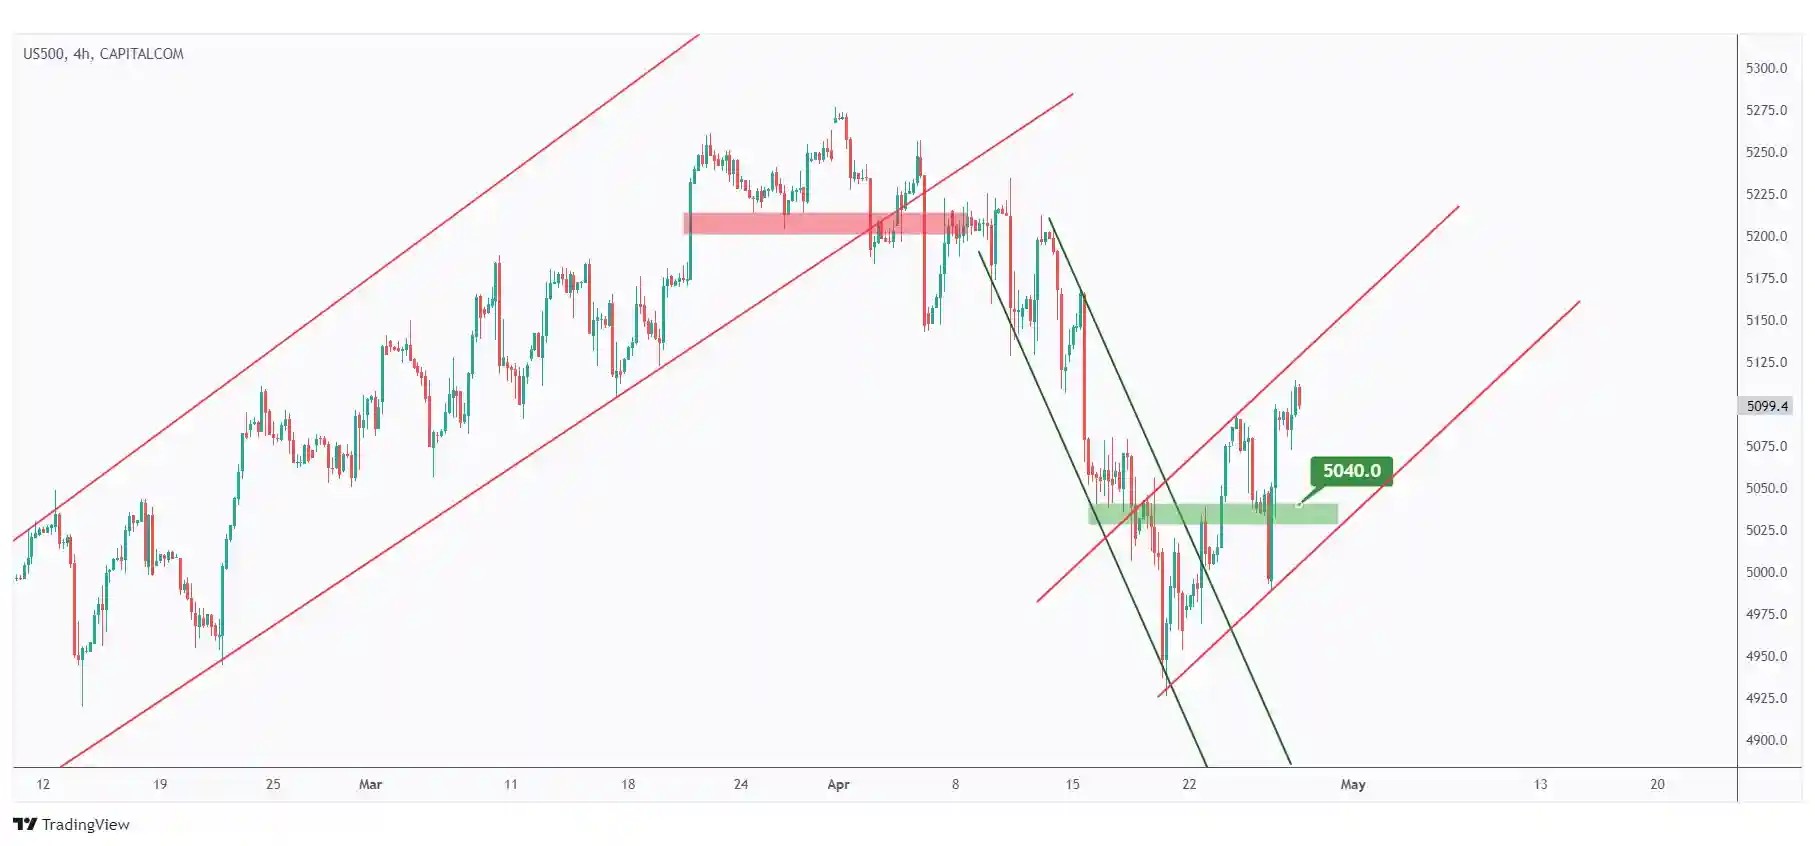 US500 4h chart overall bullish trading within a rising channel as long as the $5040 low holds.